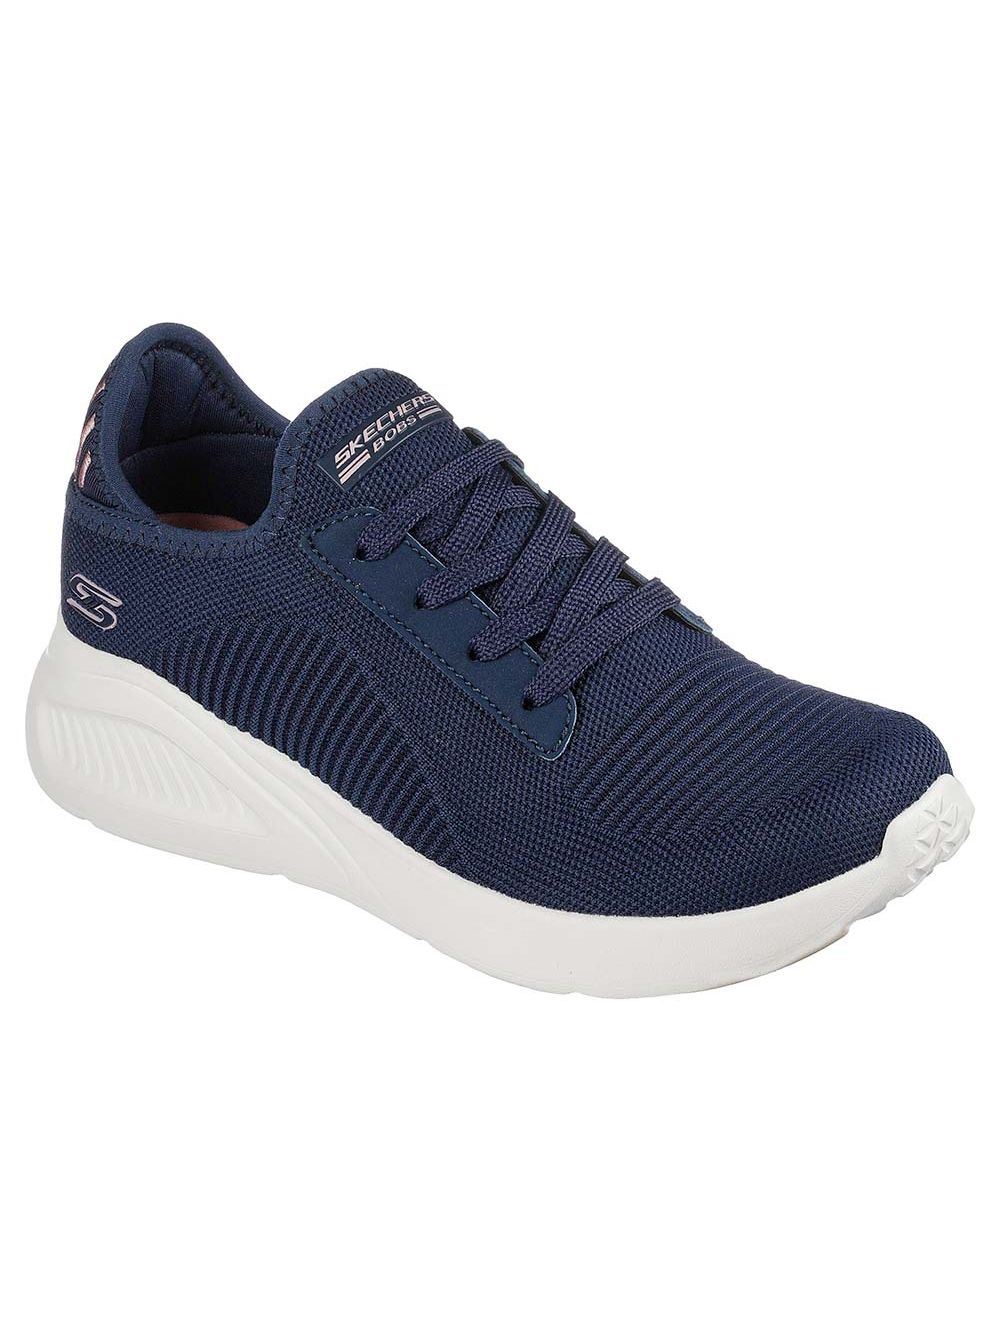 SKECHERS MUJER C11P7152NVY